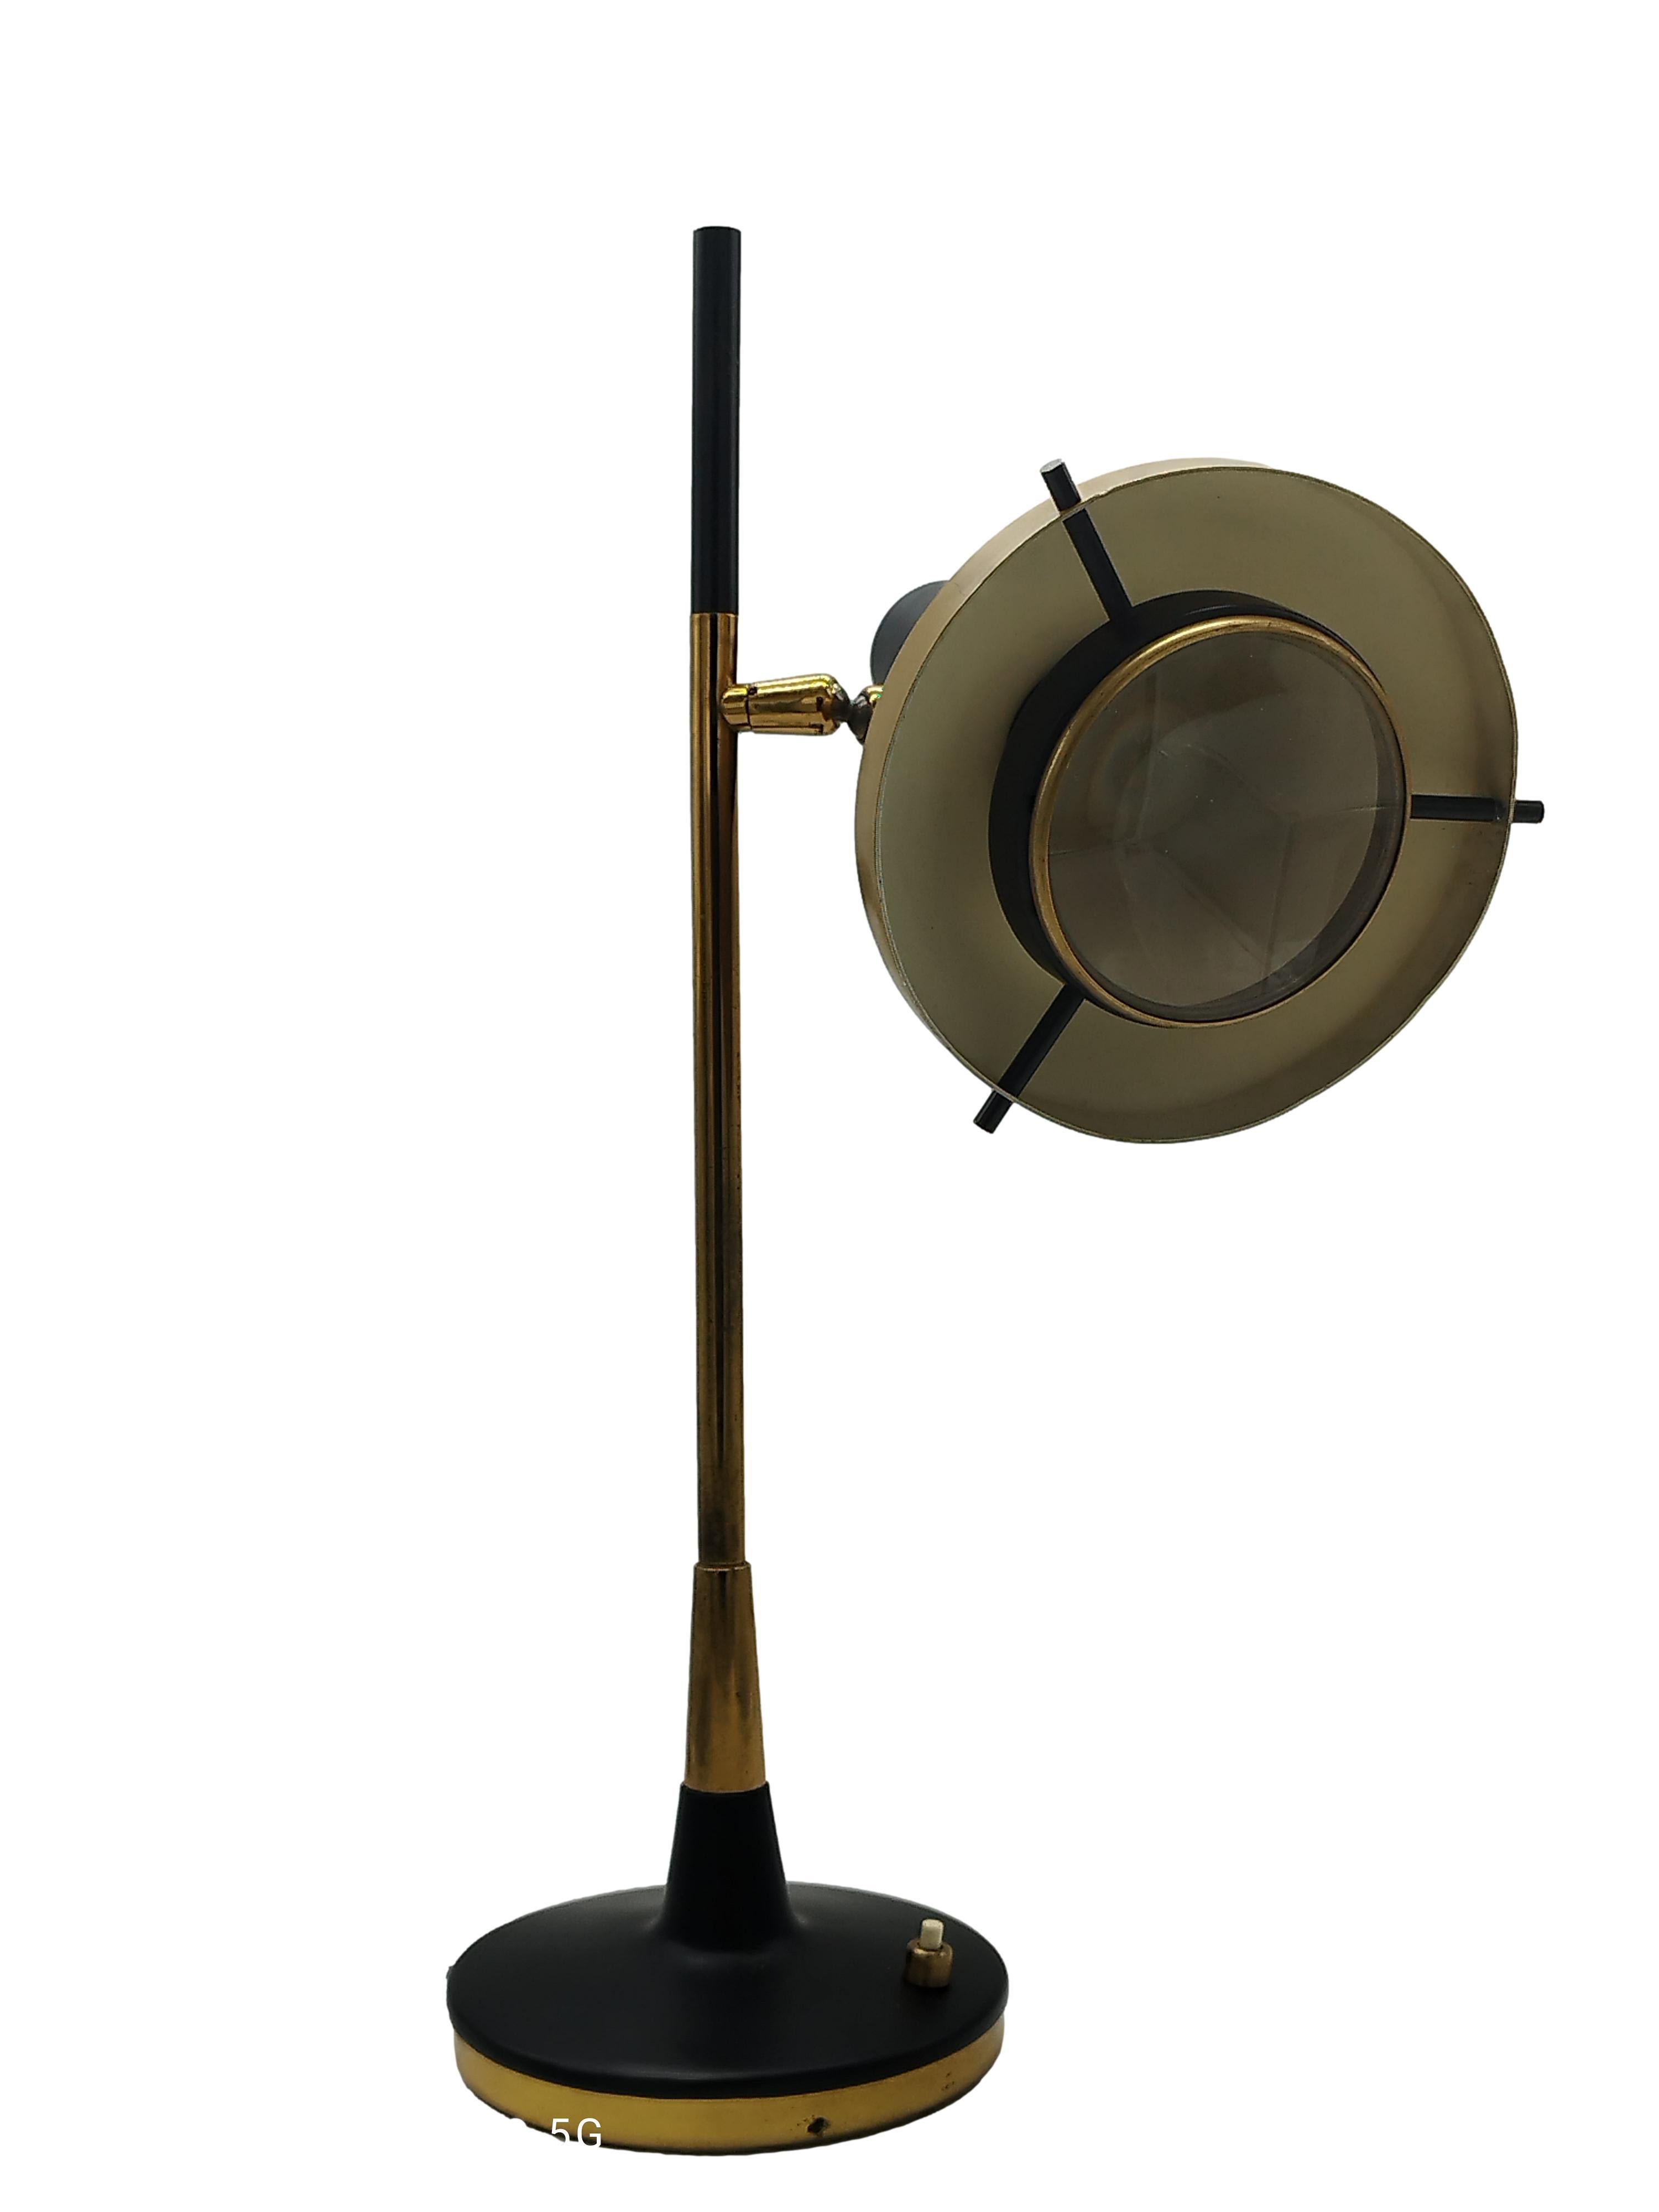 Oscar Torlasco mod. 553 table lamp. Large version.
Manufactured by Lumi, Milan, Italy, late 1950s
Painted brass and aluminium. Glass optical lens. 